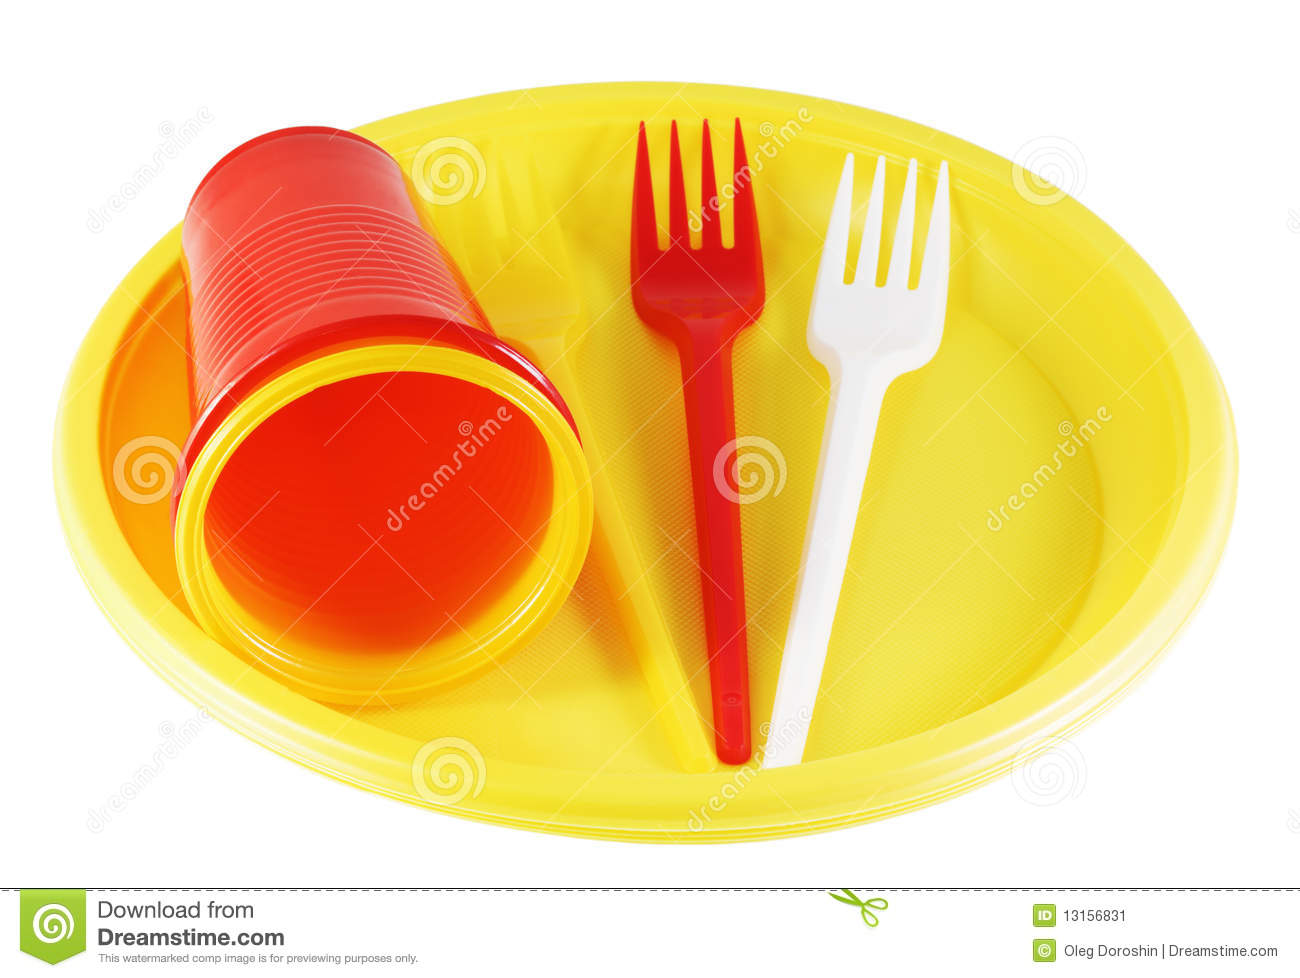 Plastic Plates And Forks Stock Image   Image  13156831